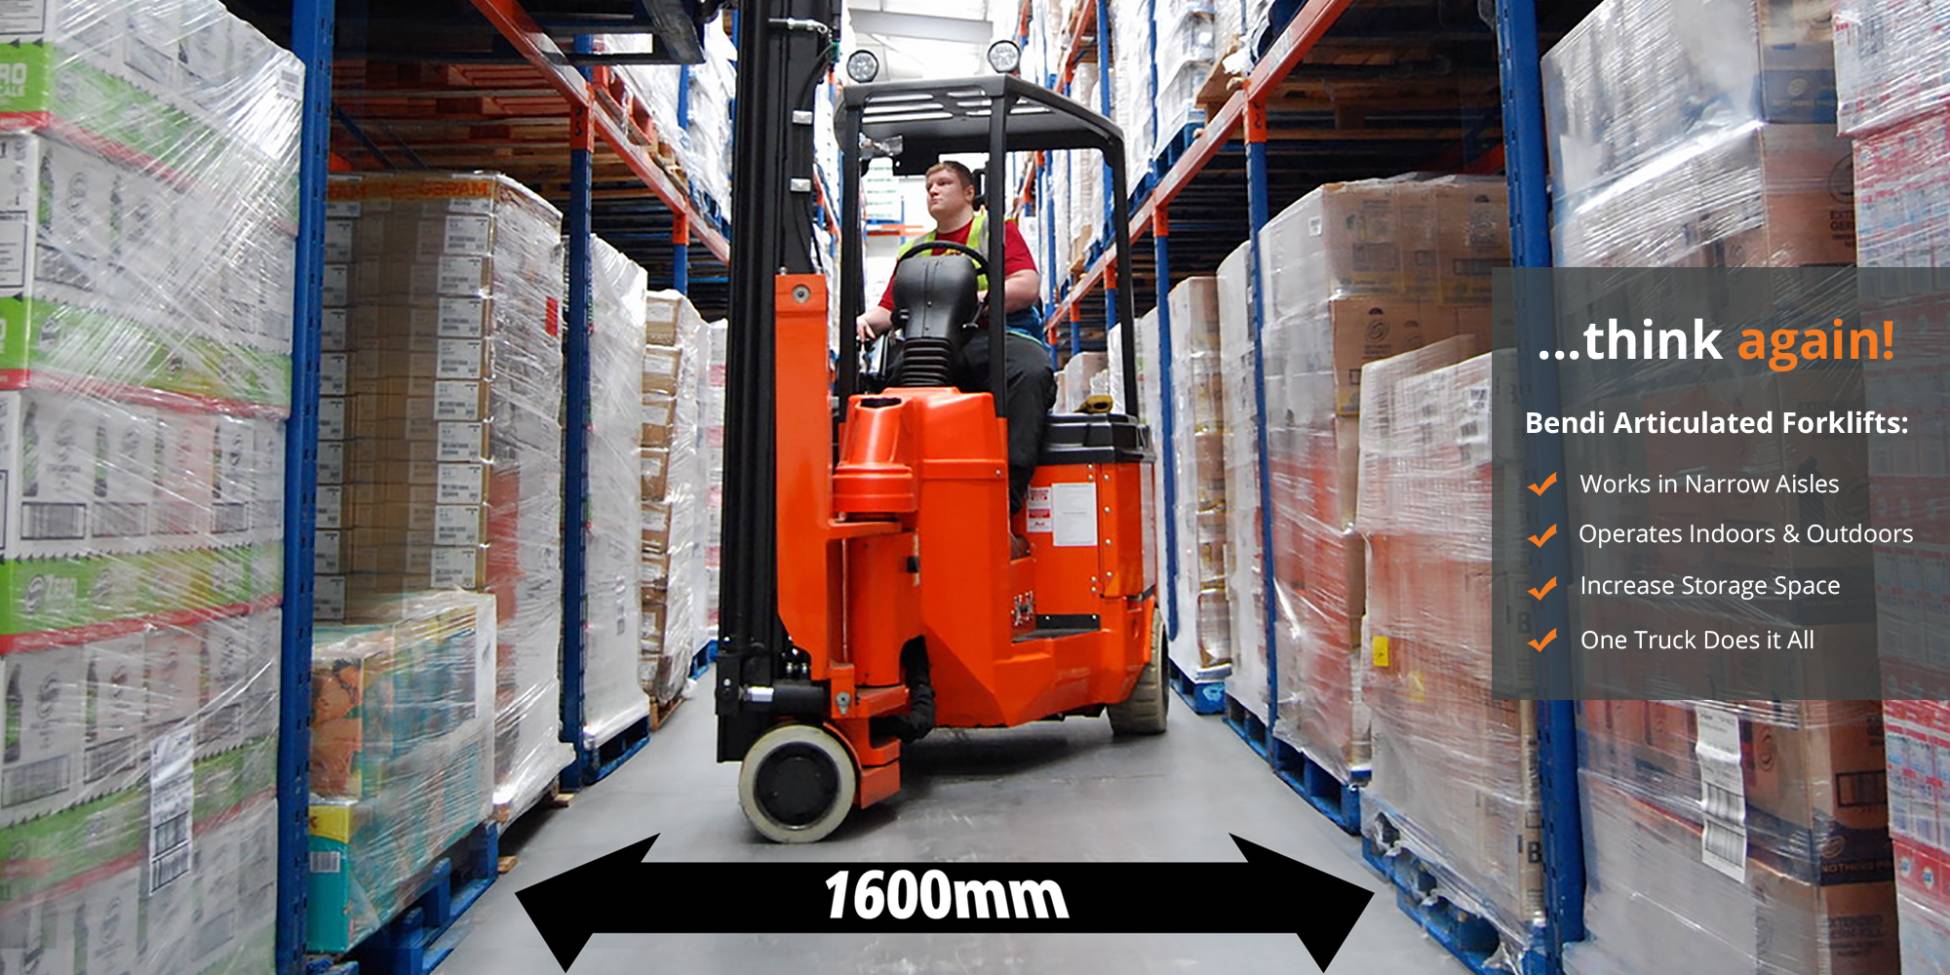 Bendi Articulated Forklift | Narrow Aisle Forklift Graphic